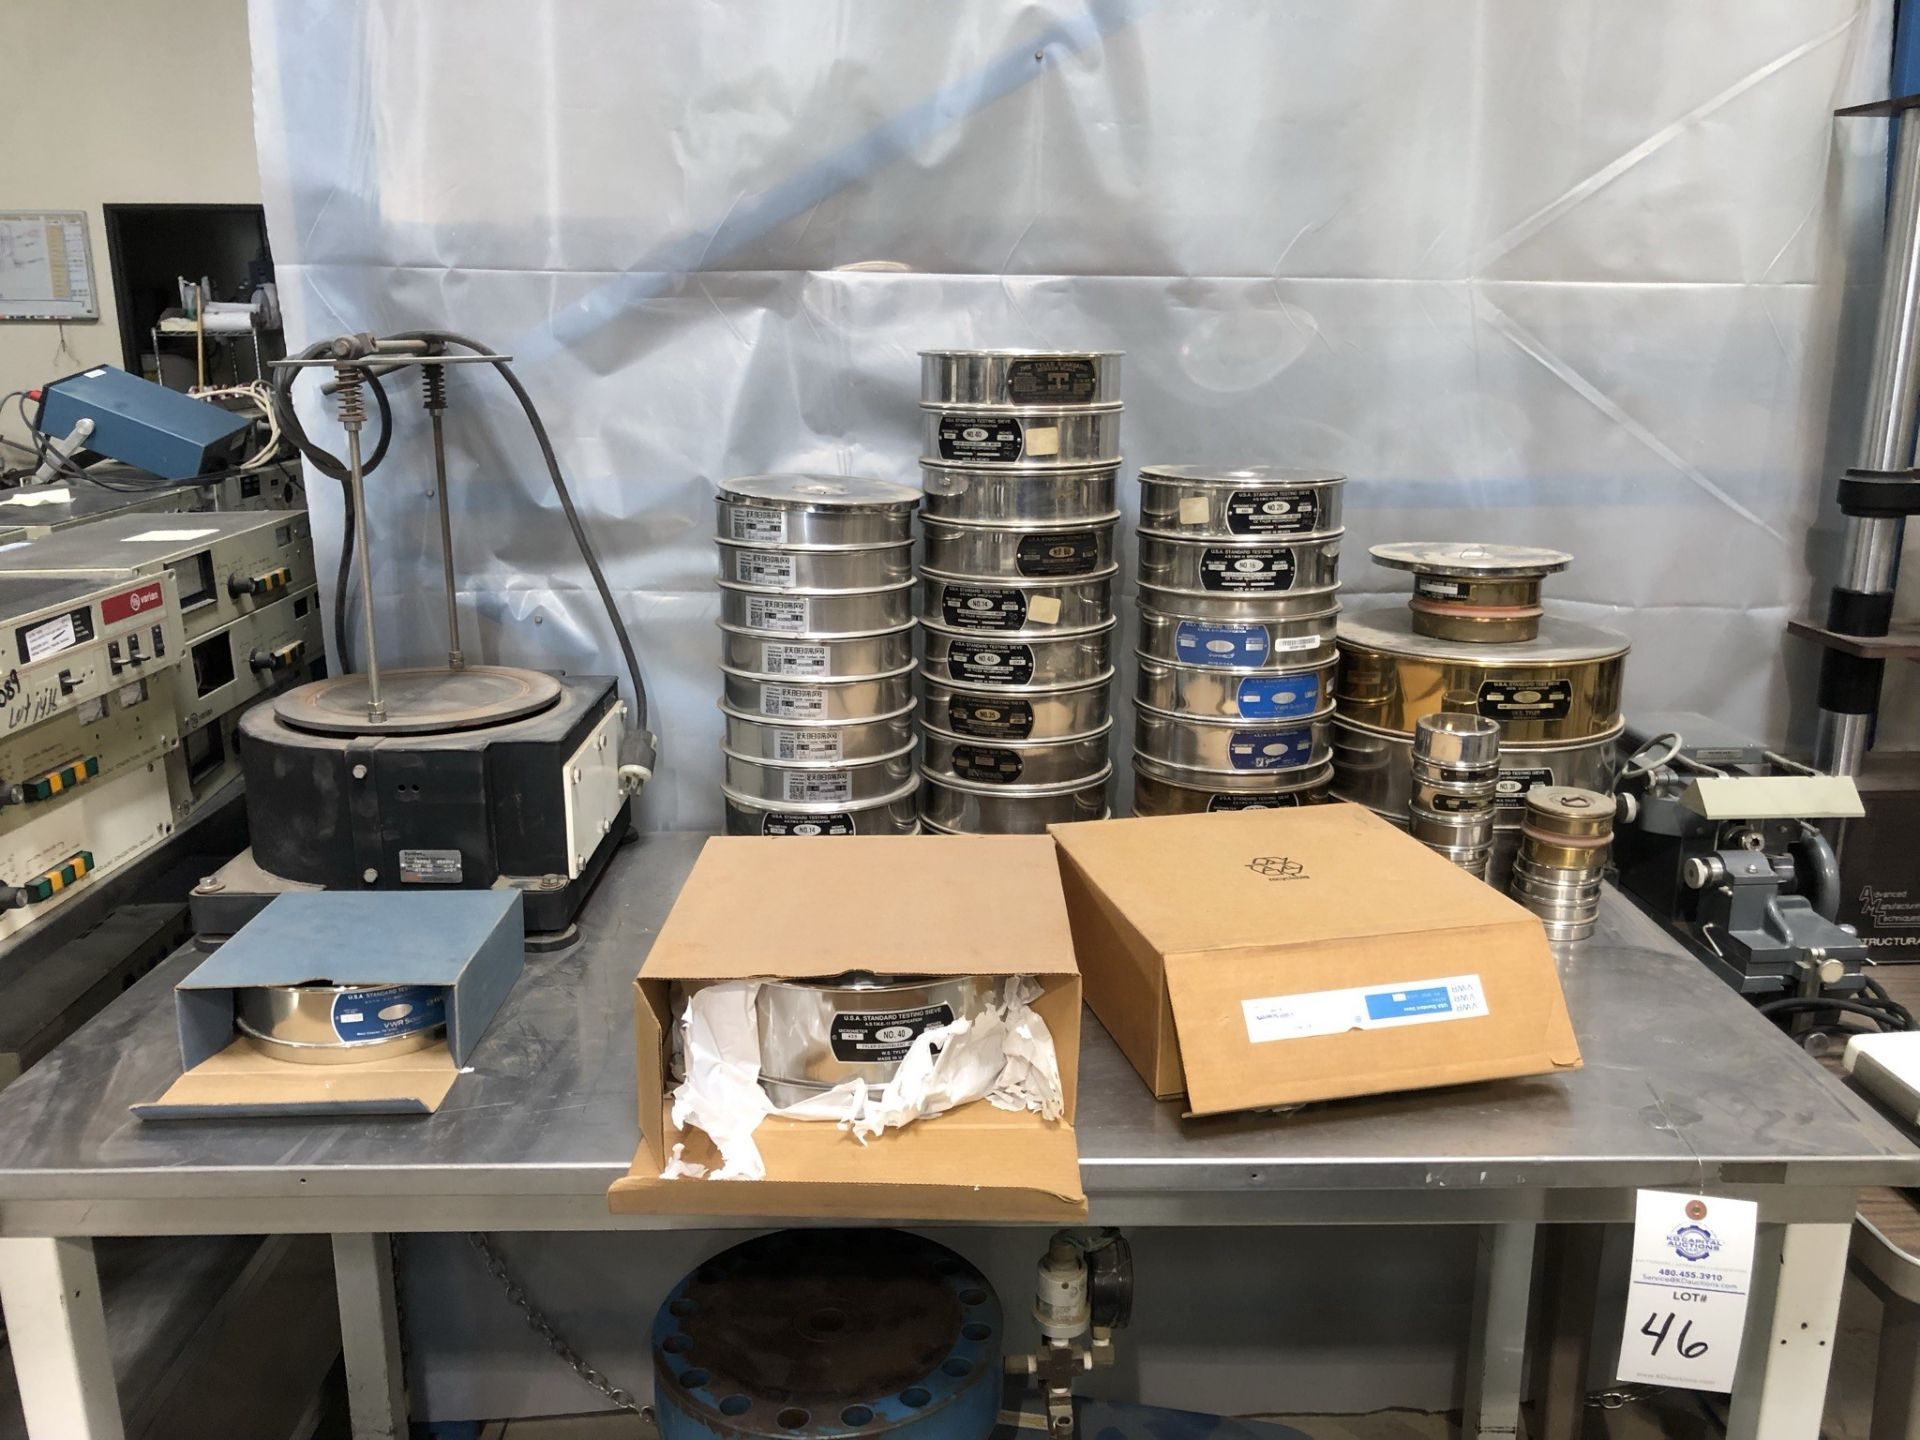 FMC/Syntron RoTap Style Test Sieve Shaker with a large lot of ASTM E-11 Test Sieves. Includes